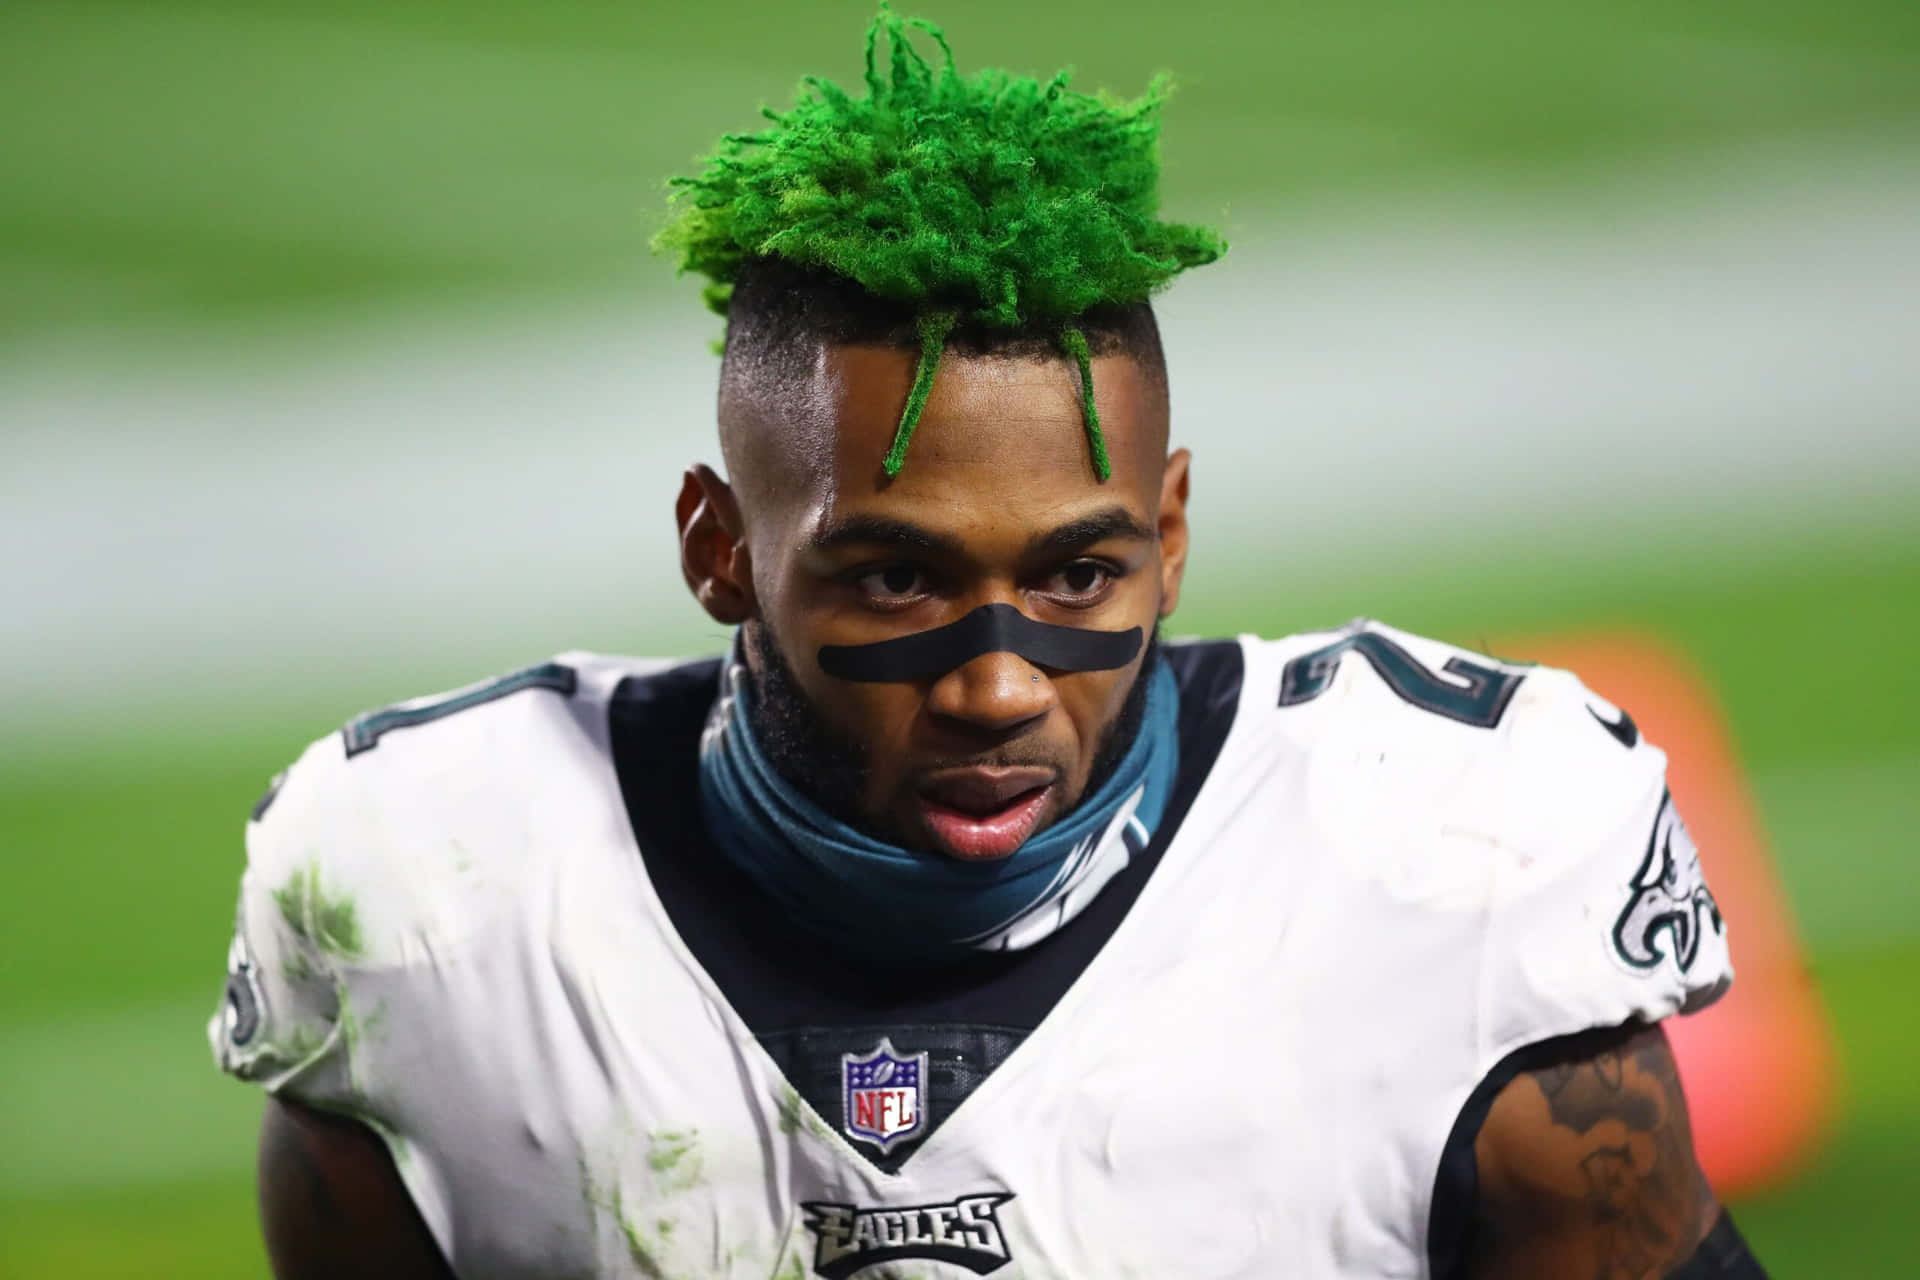 Green Haired Football Player Wallpaper